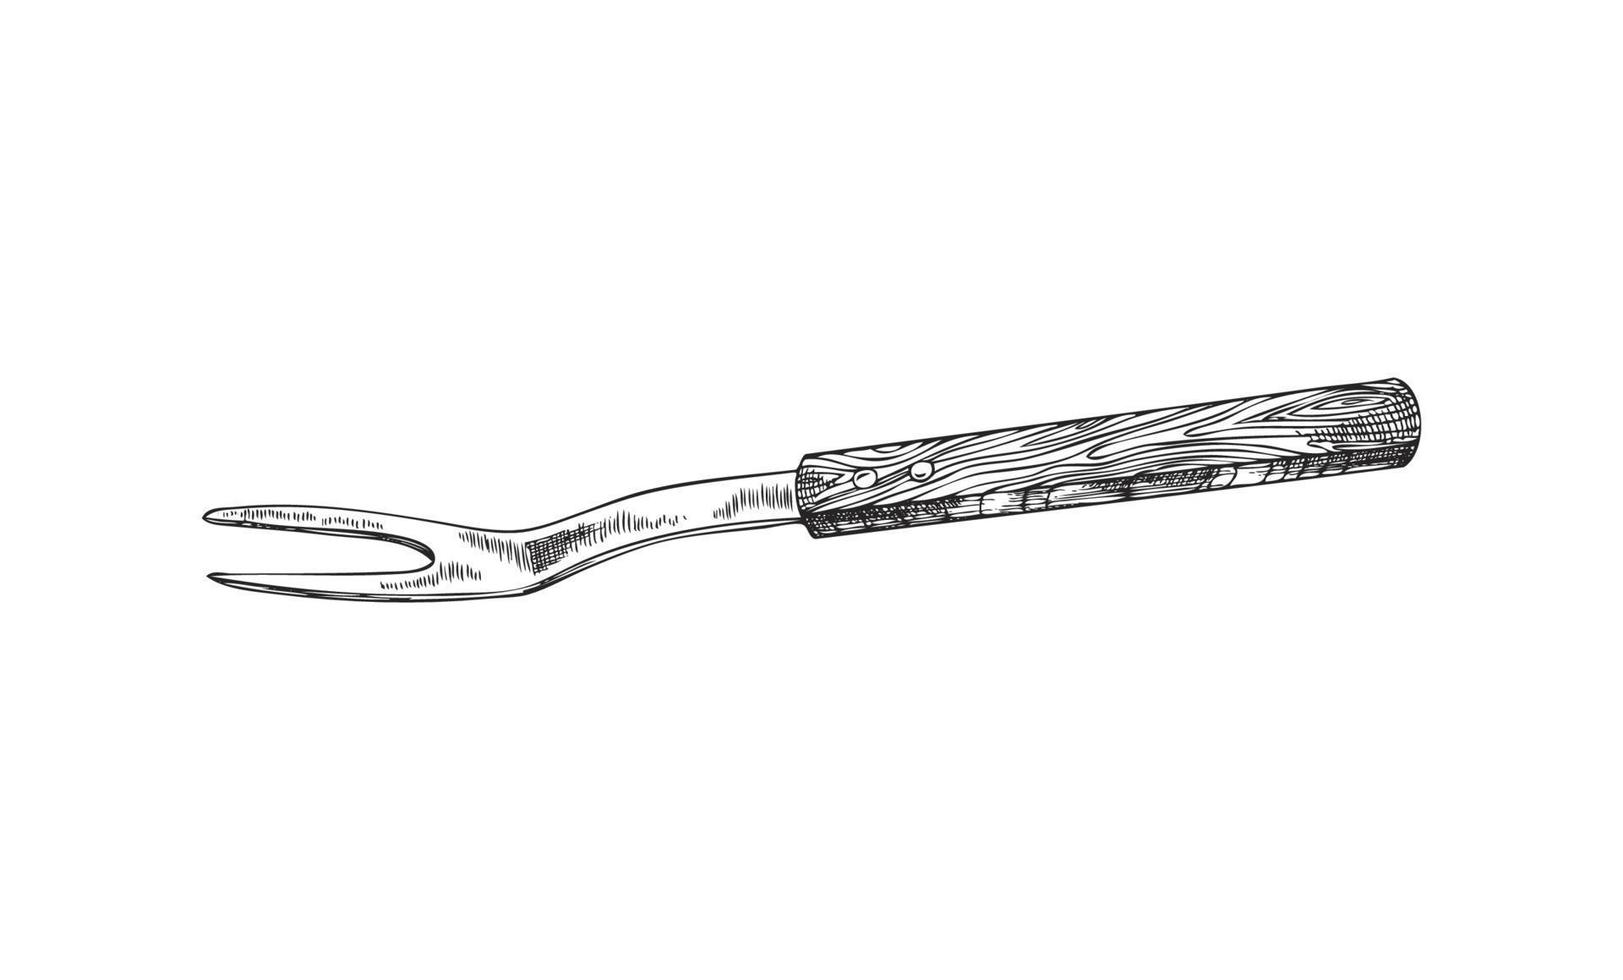 Steak fork with wooden handle, hand drawn sketch vector illustration isolated on white background.